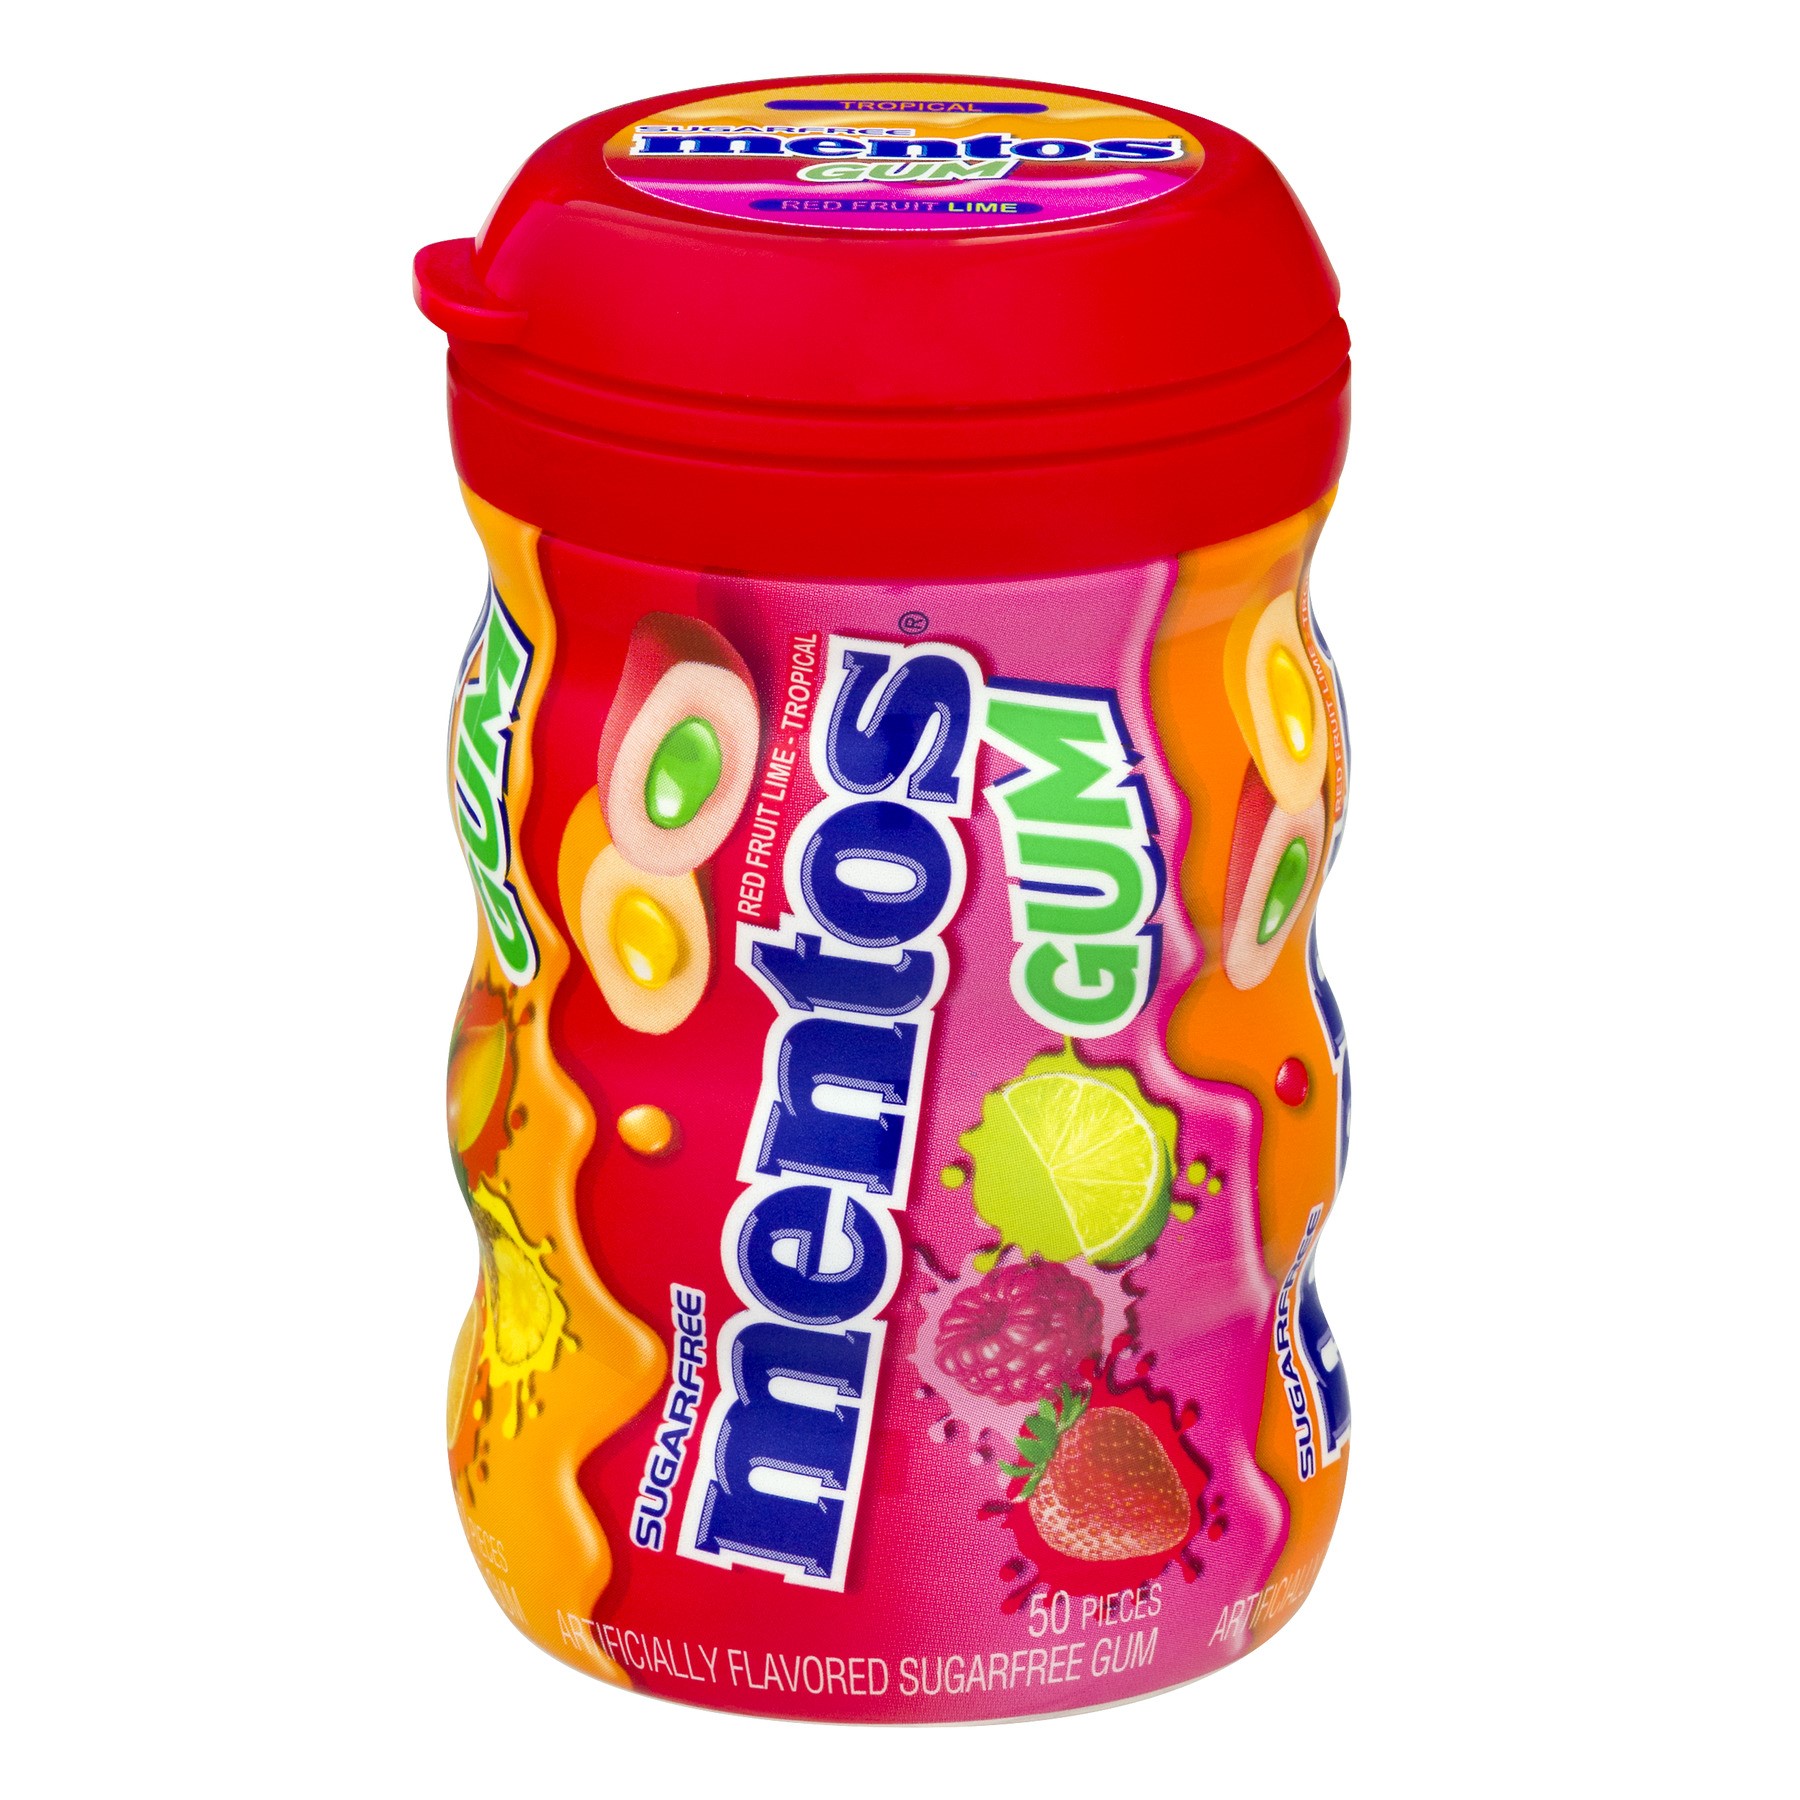 Mentos Gum Sugar-Free Tropical Red Fruit Lime Chewing Gum, 50 Regular Size Pieces, Bottle - image 1 of 9